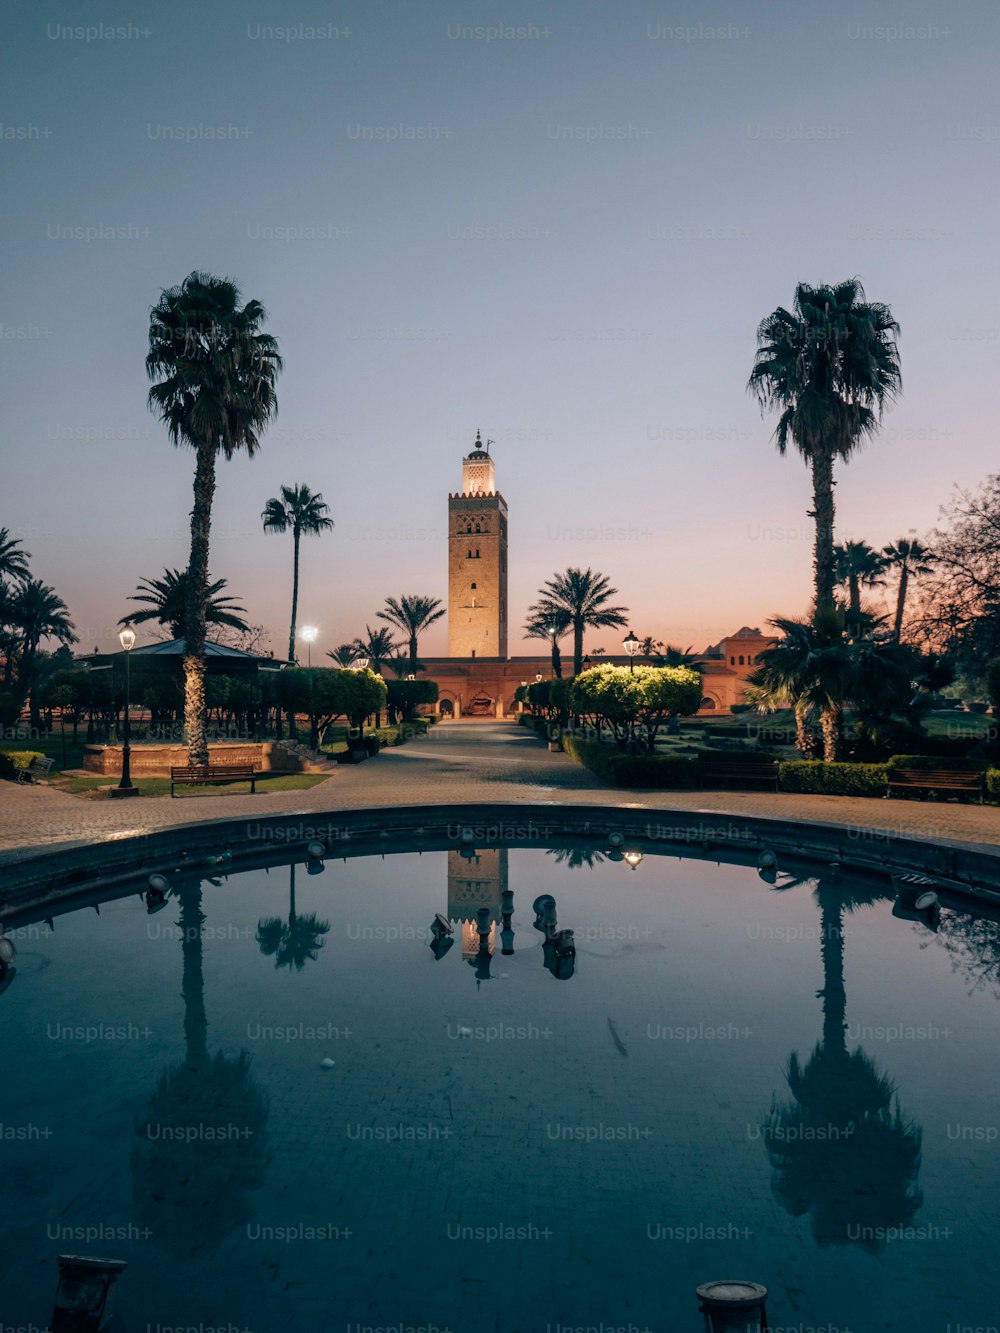 The Koutoubia Mosque in Marrakech, Morocco during sunrise